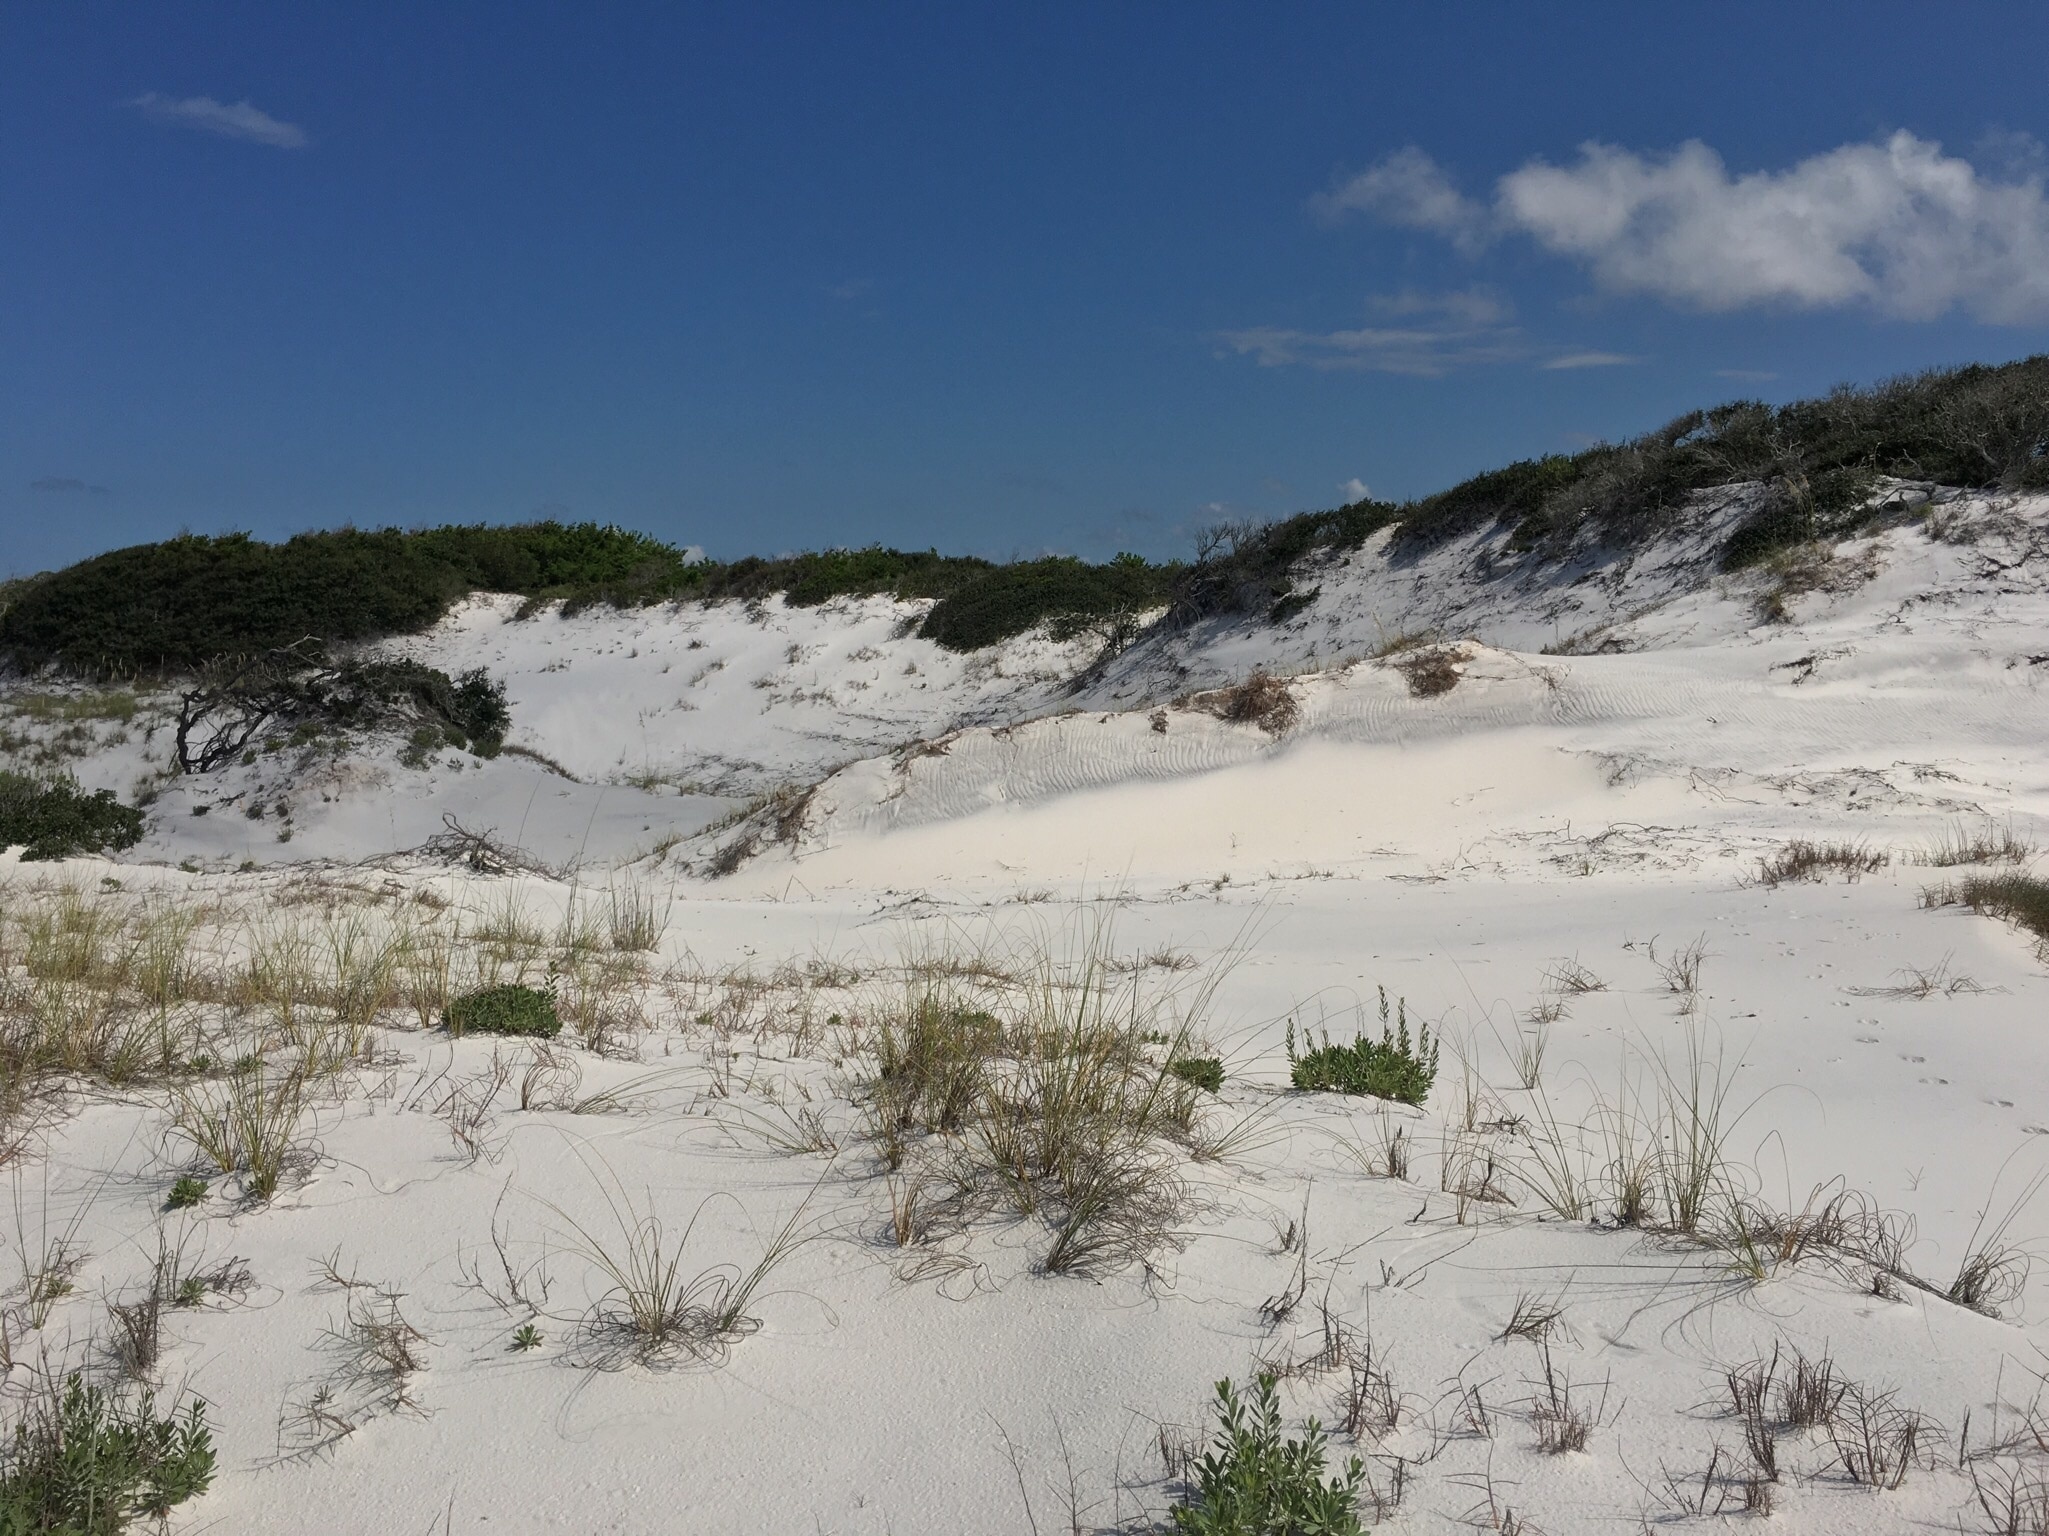 The sand is so white it almost looks like fresh powder. 